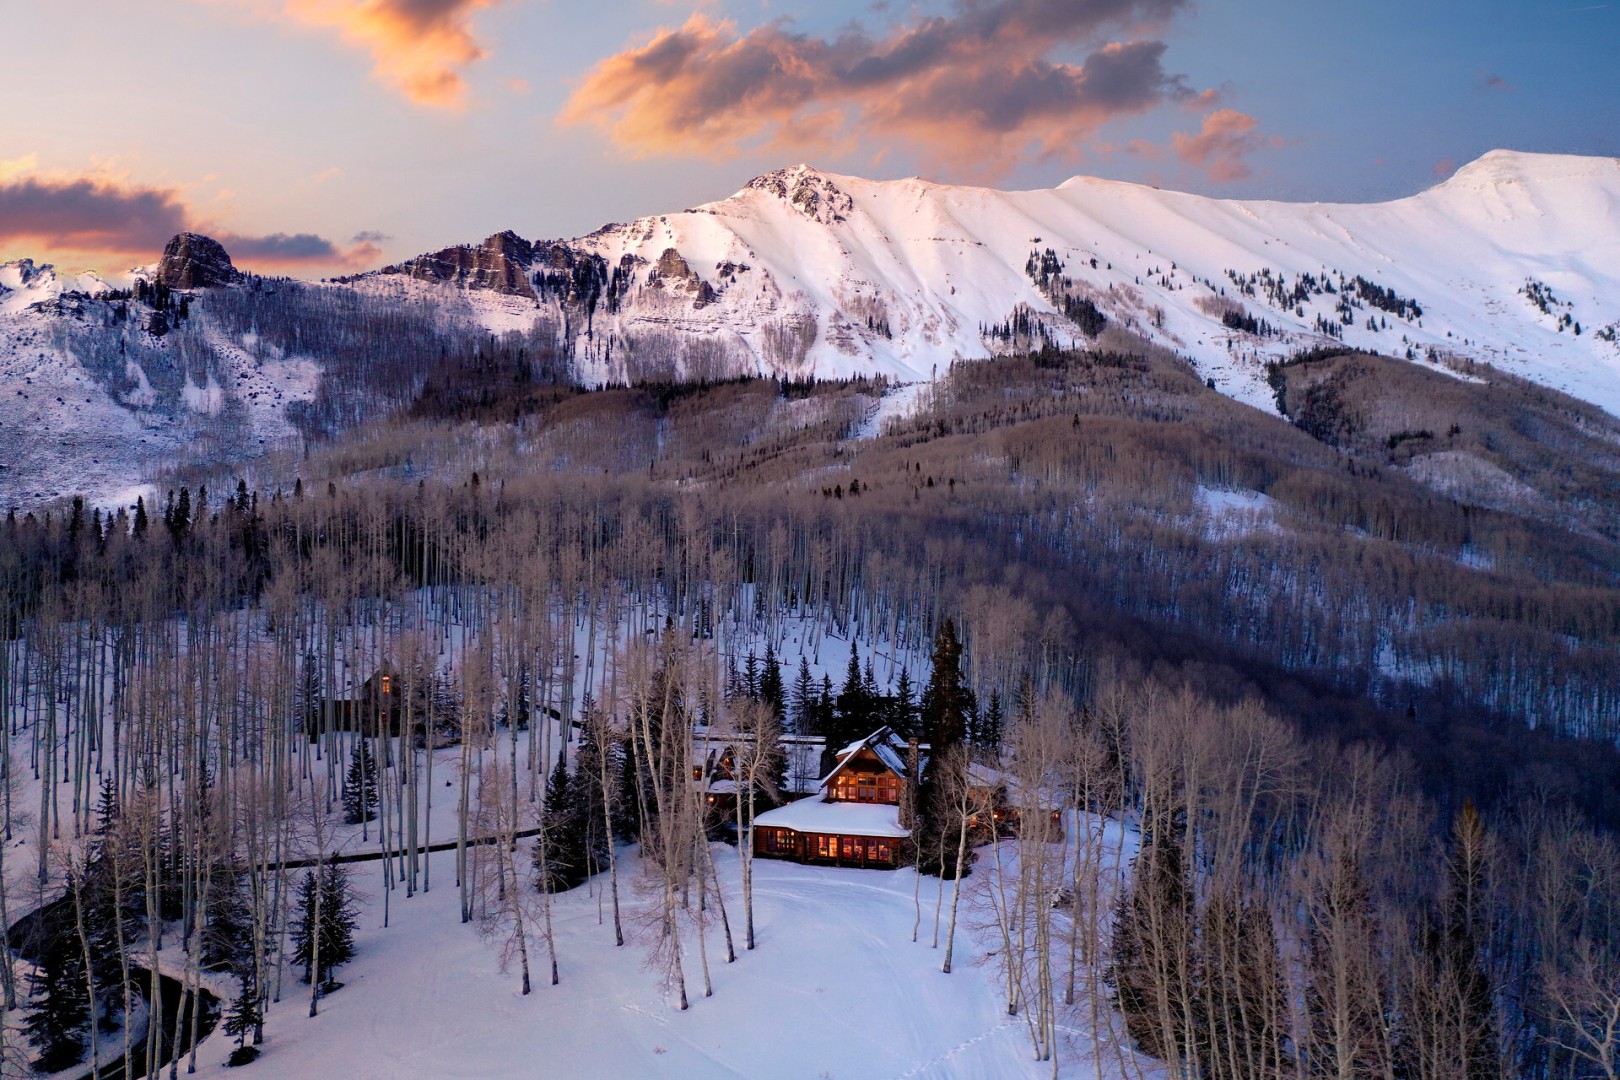 Tom Cruise's Colorado mountain ranch is for sale – and for US$ million  you can call Ralph Lauren, Robert Redford and Neil Young your neighbours |  South China Morning Post